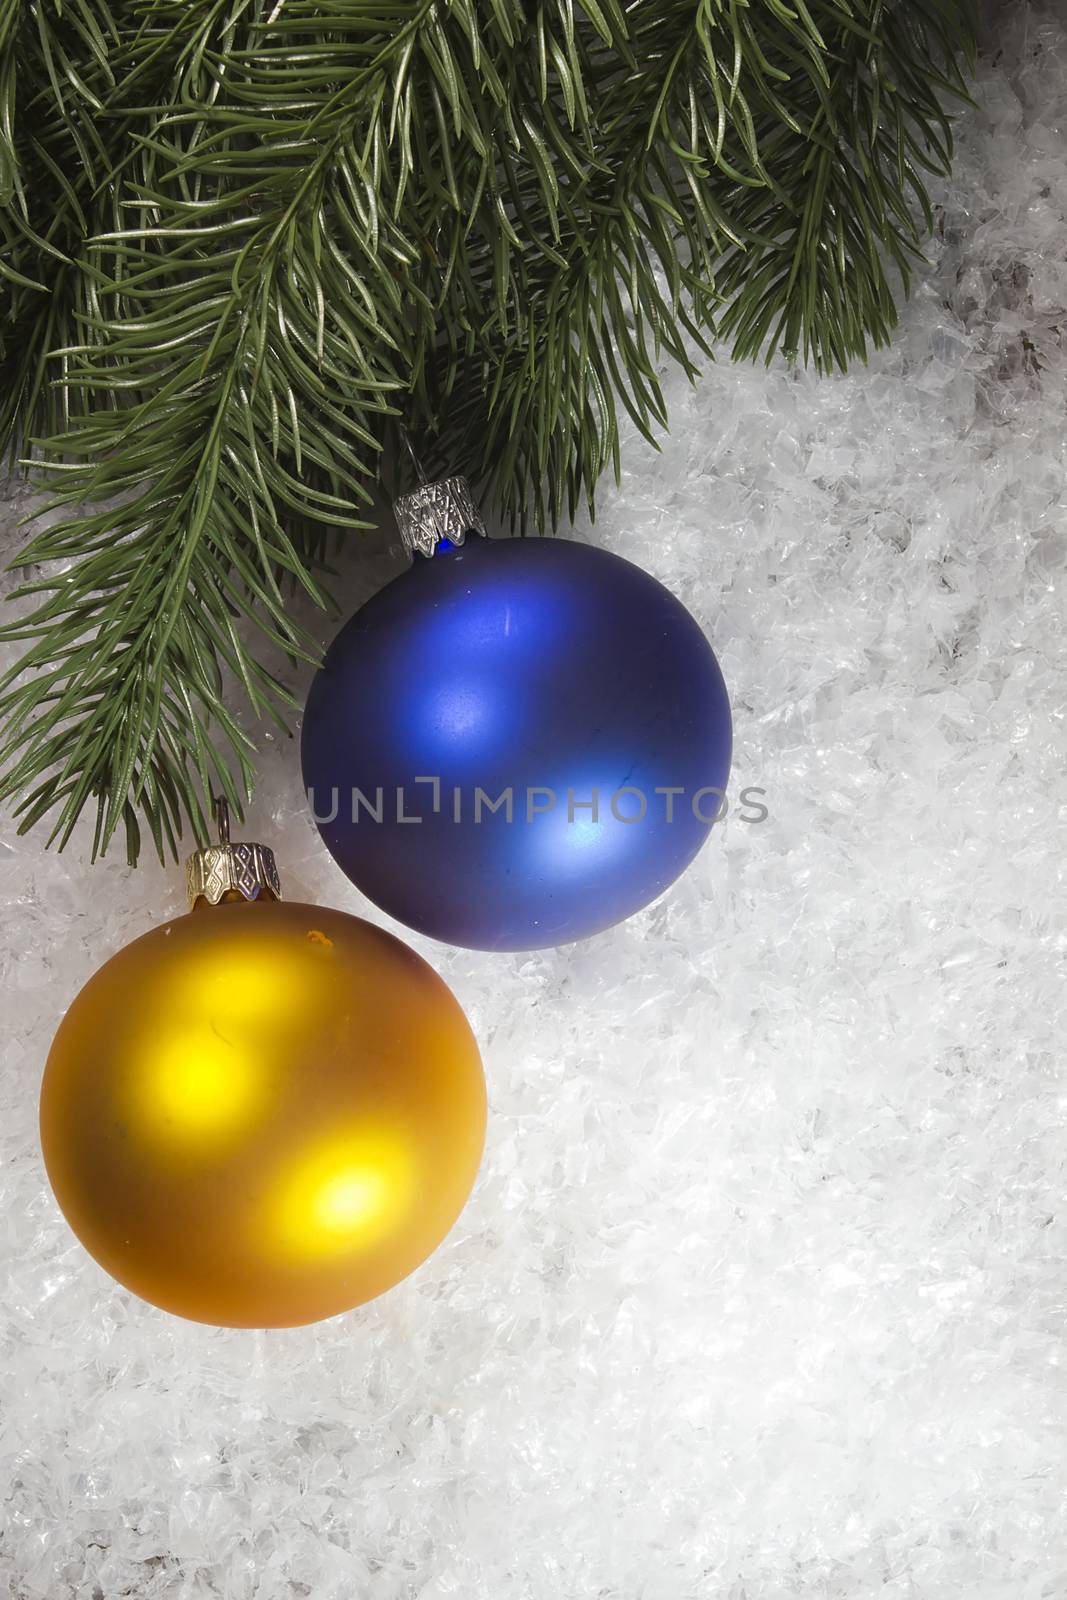 Balls and fir branch on snow by VIPDesignUSA